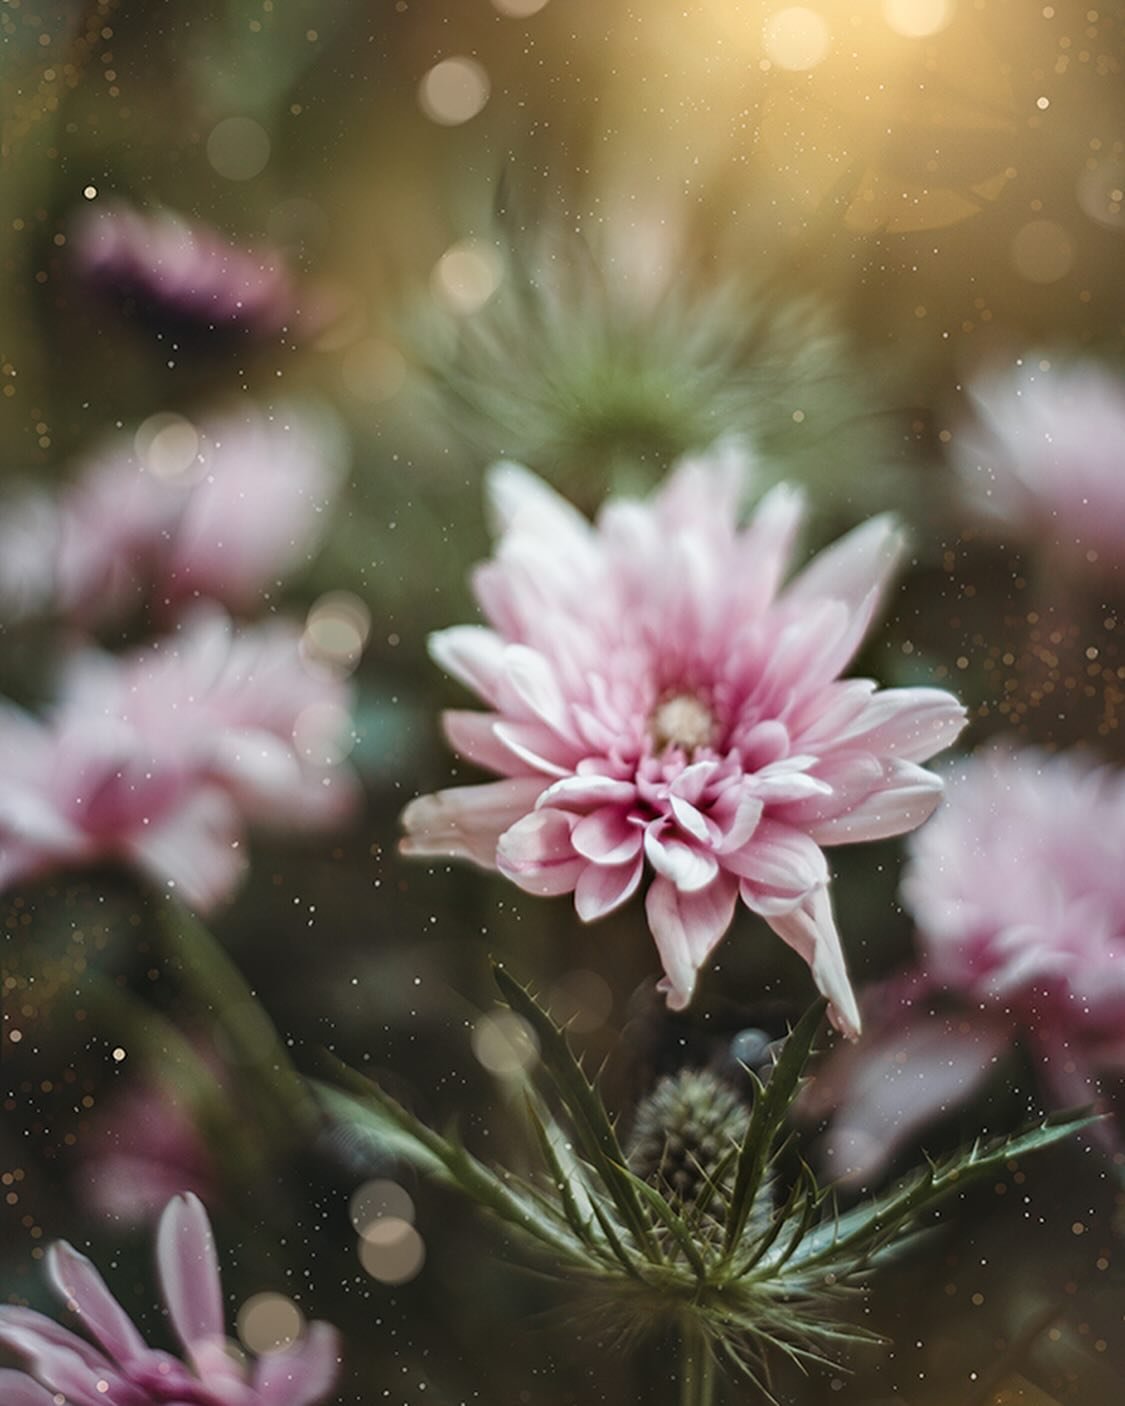 Kind of a moodier feel but I like it 😊

👉 Common question about my flower photography workshop: Do I need the same lens as you? Definitely not, I have used a variety of lenses through the years, bring whatever you have!

✨ This one has four overlay